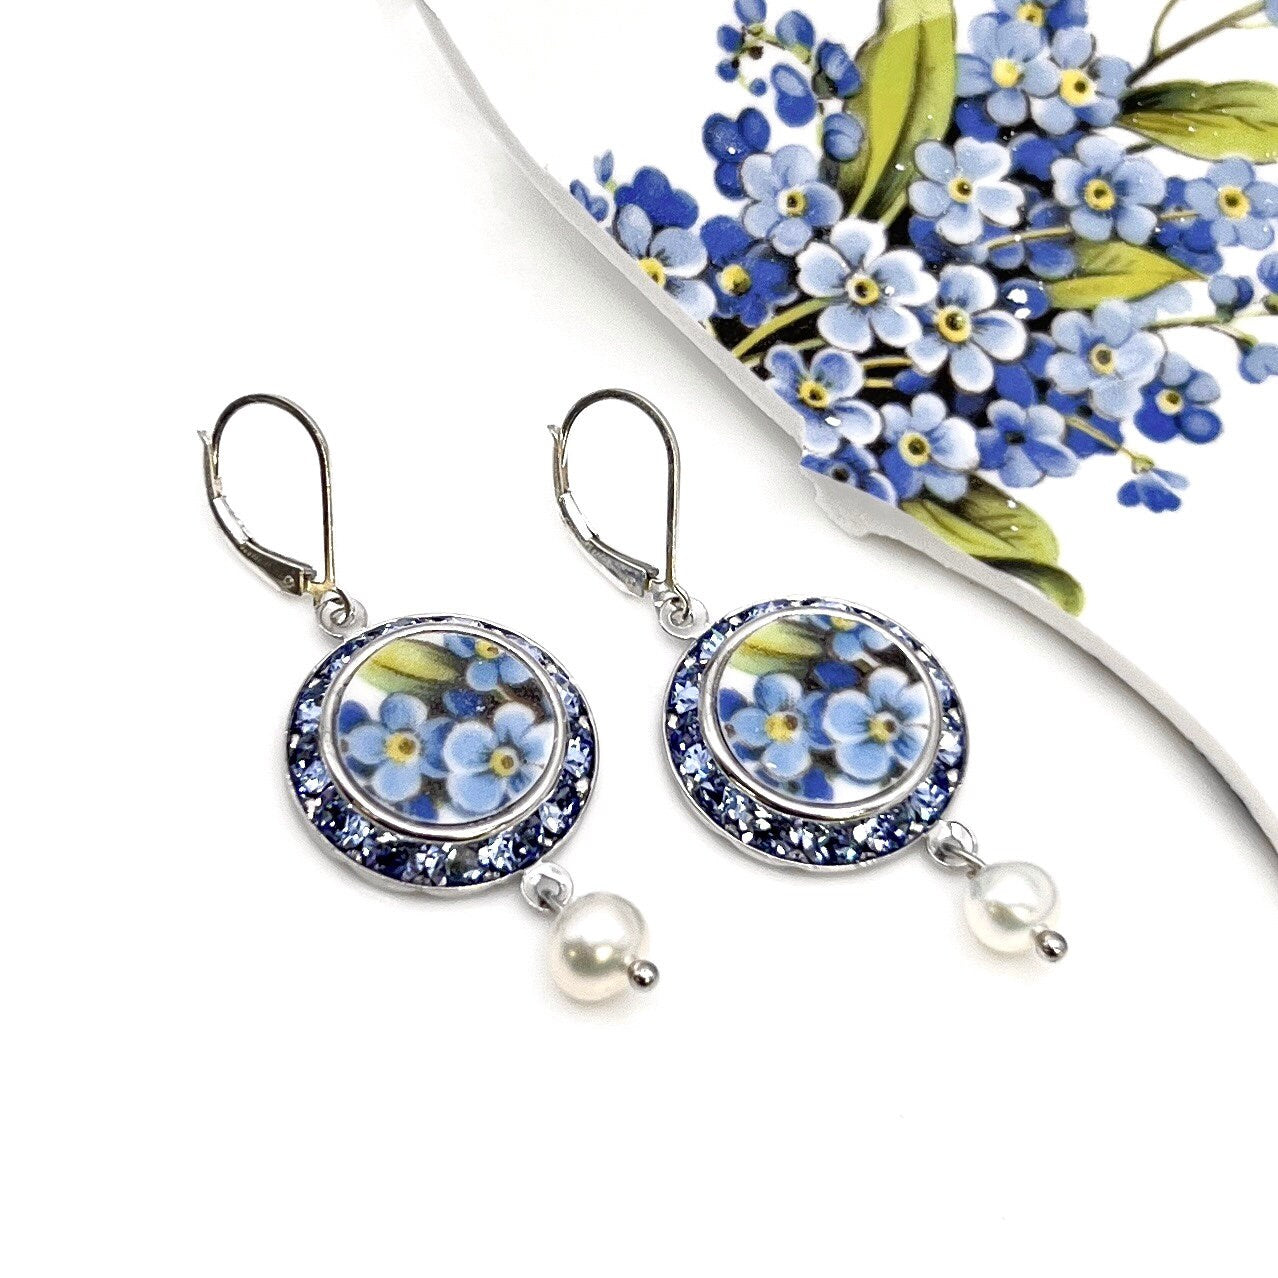 Vintage China Blue Forget Me Not Earrings, Crystal Broken China Jewelry, Anniversary Gift for Her